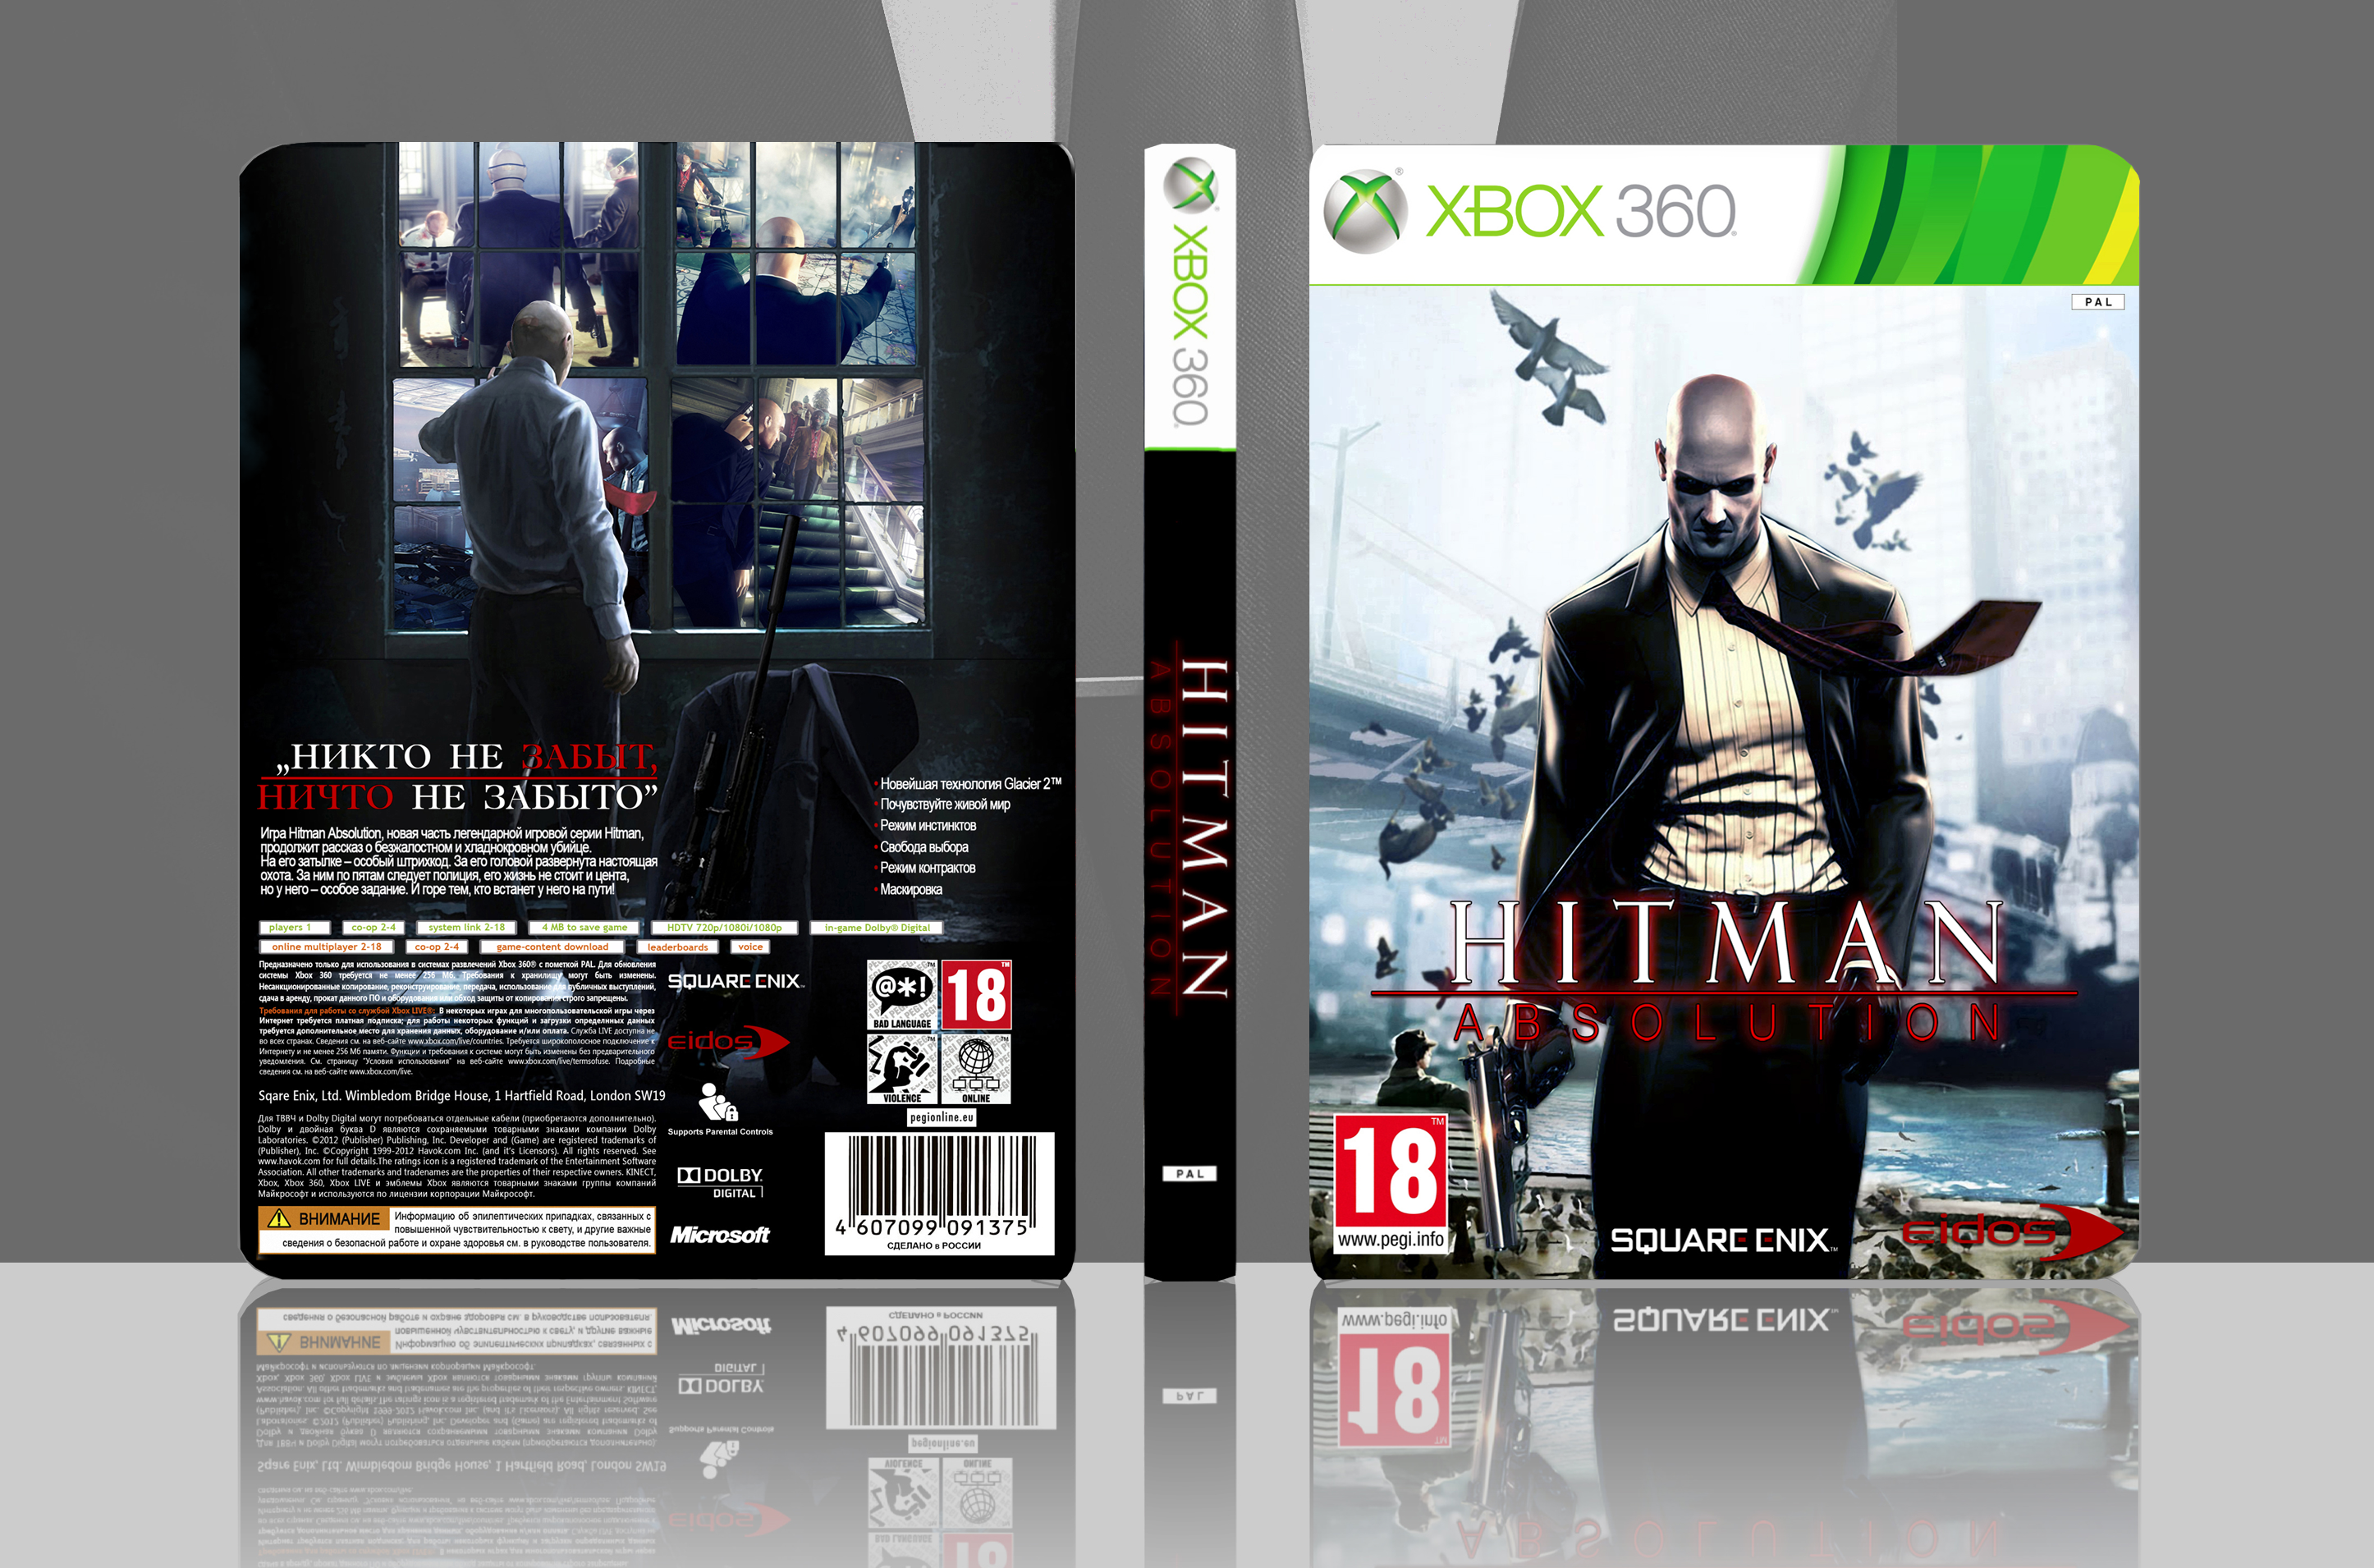 hitman absolution xbox download